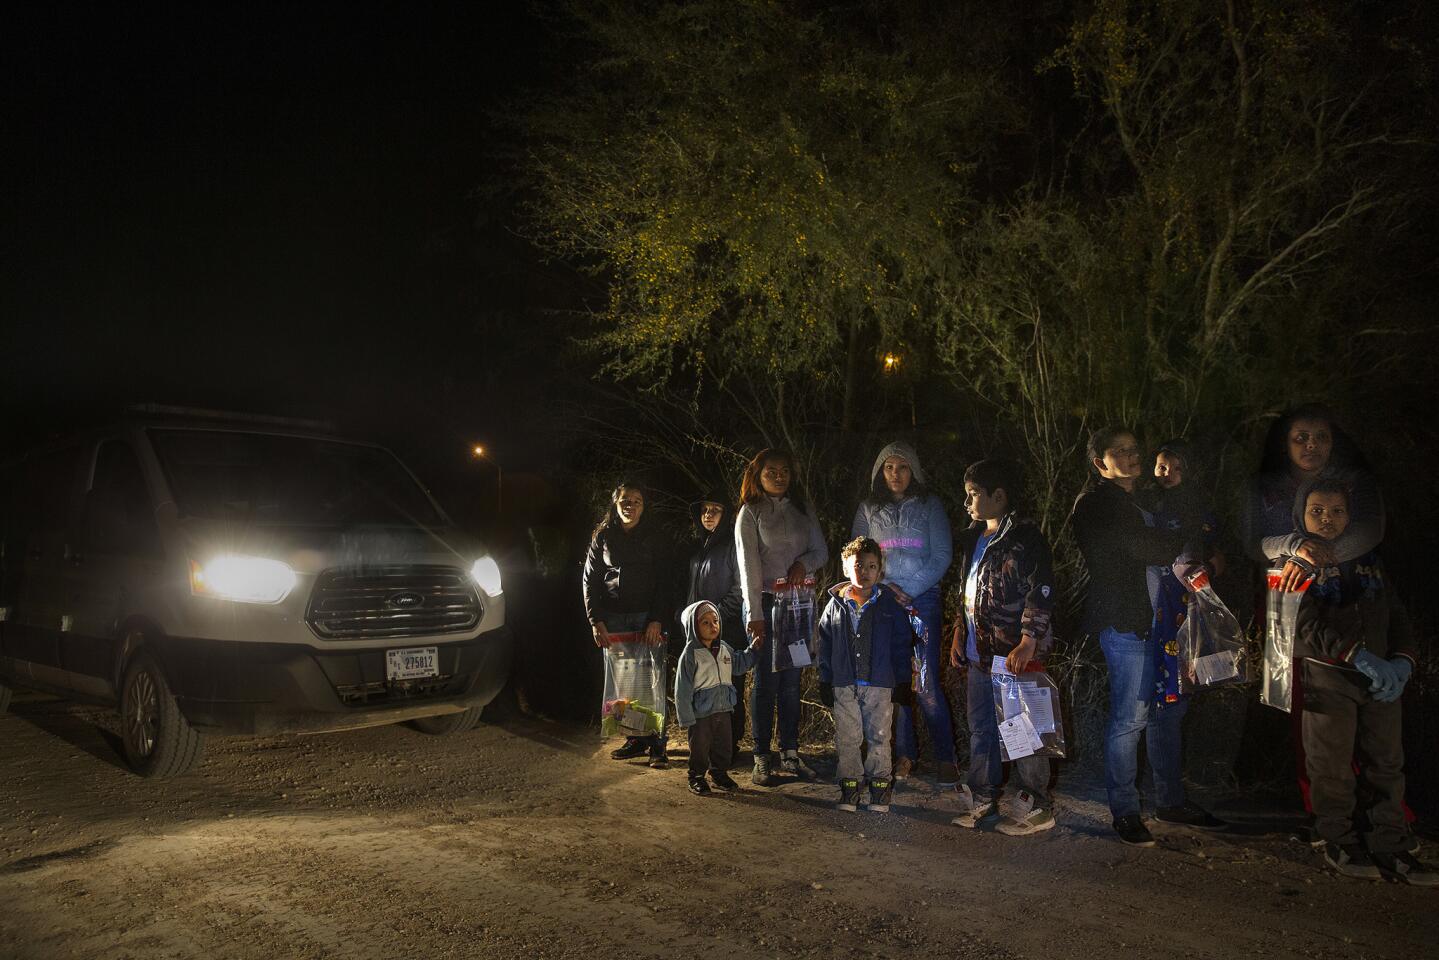 After crossing the Rio Grande River at night with the help of smugglers, group of mainly women and children from Central America are detained by U.S. Border Patrol agents before being taken into detention.